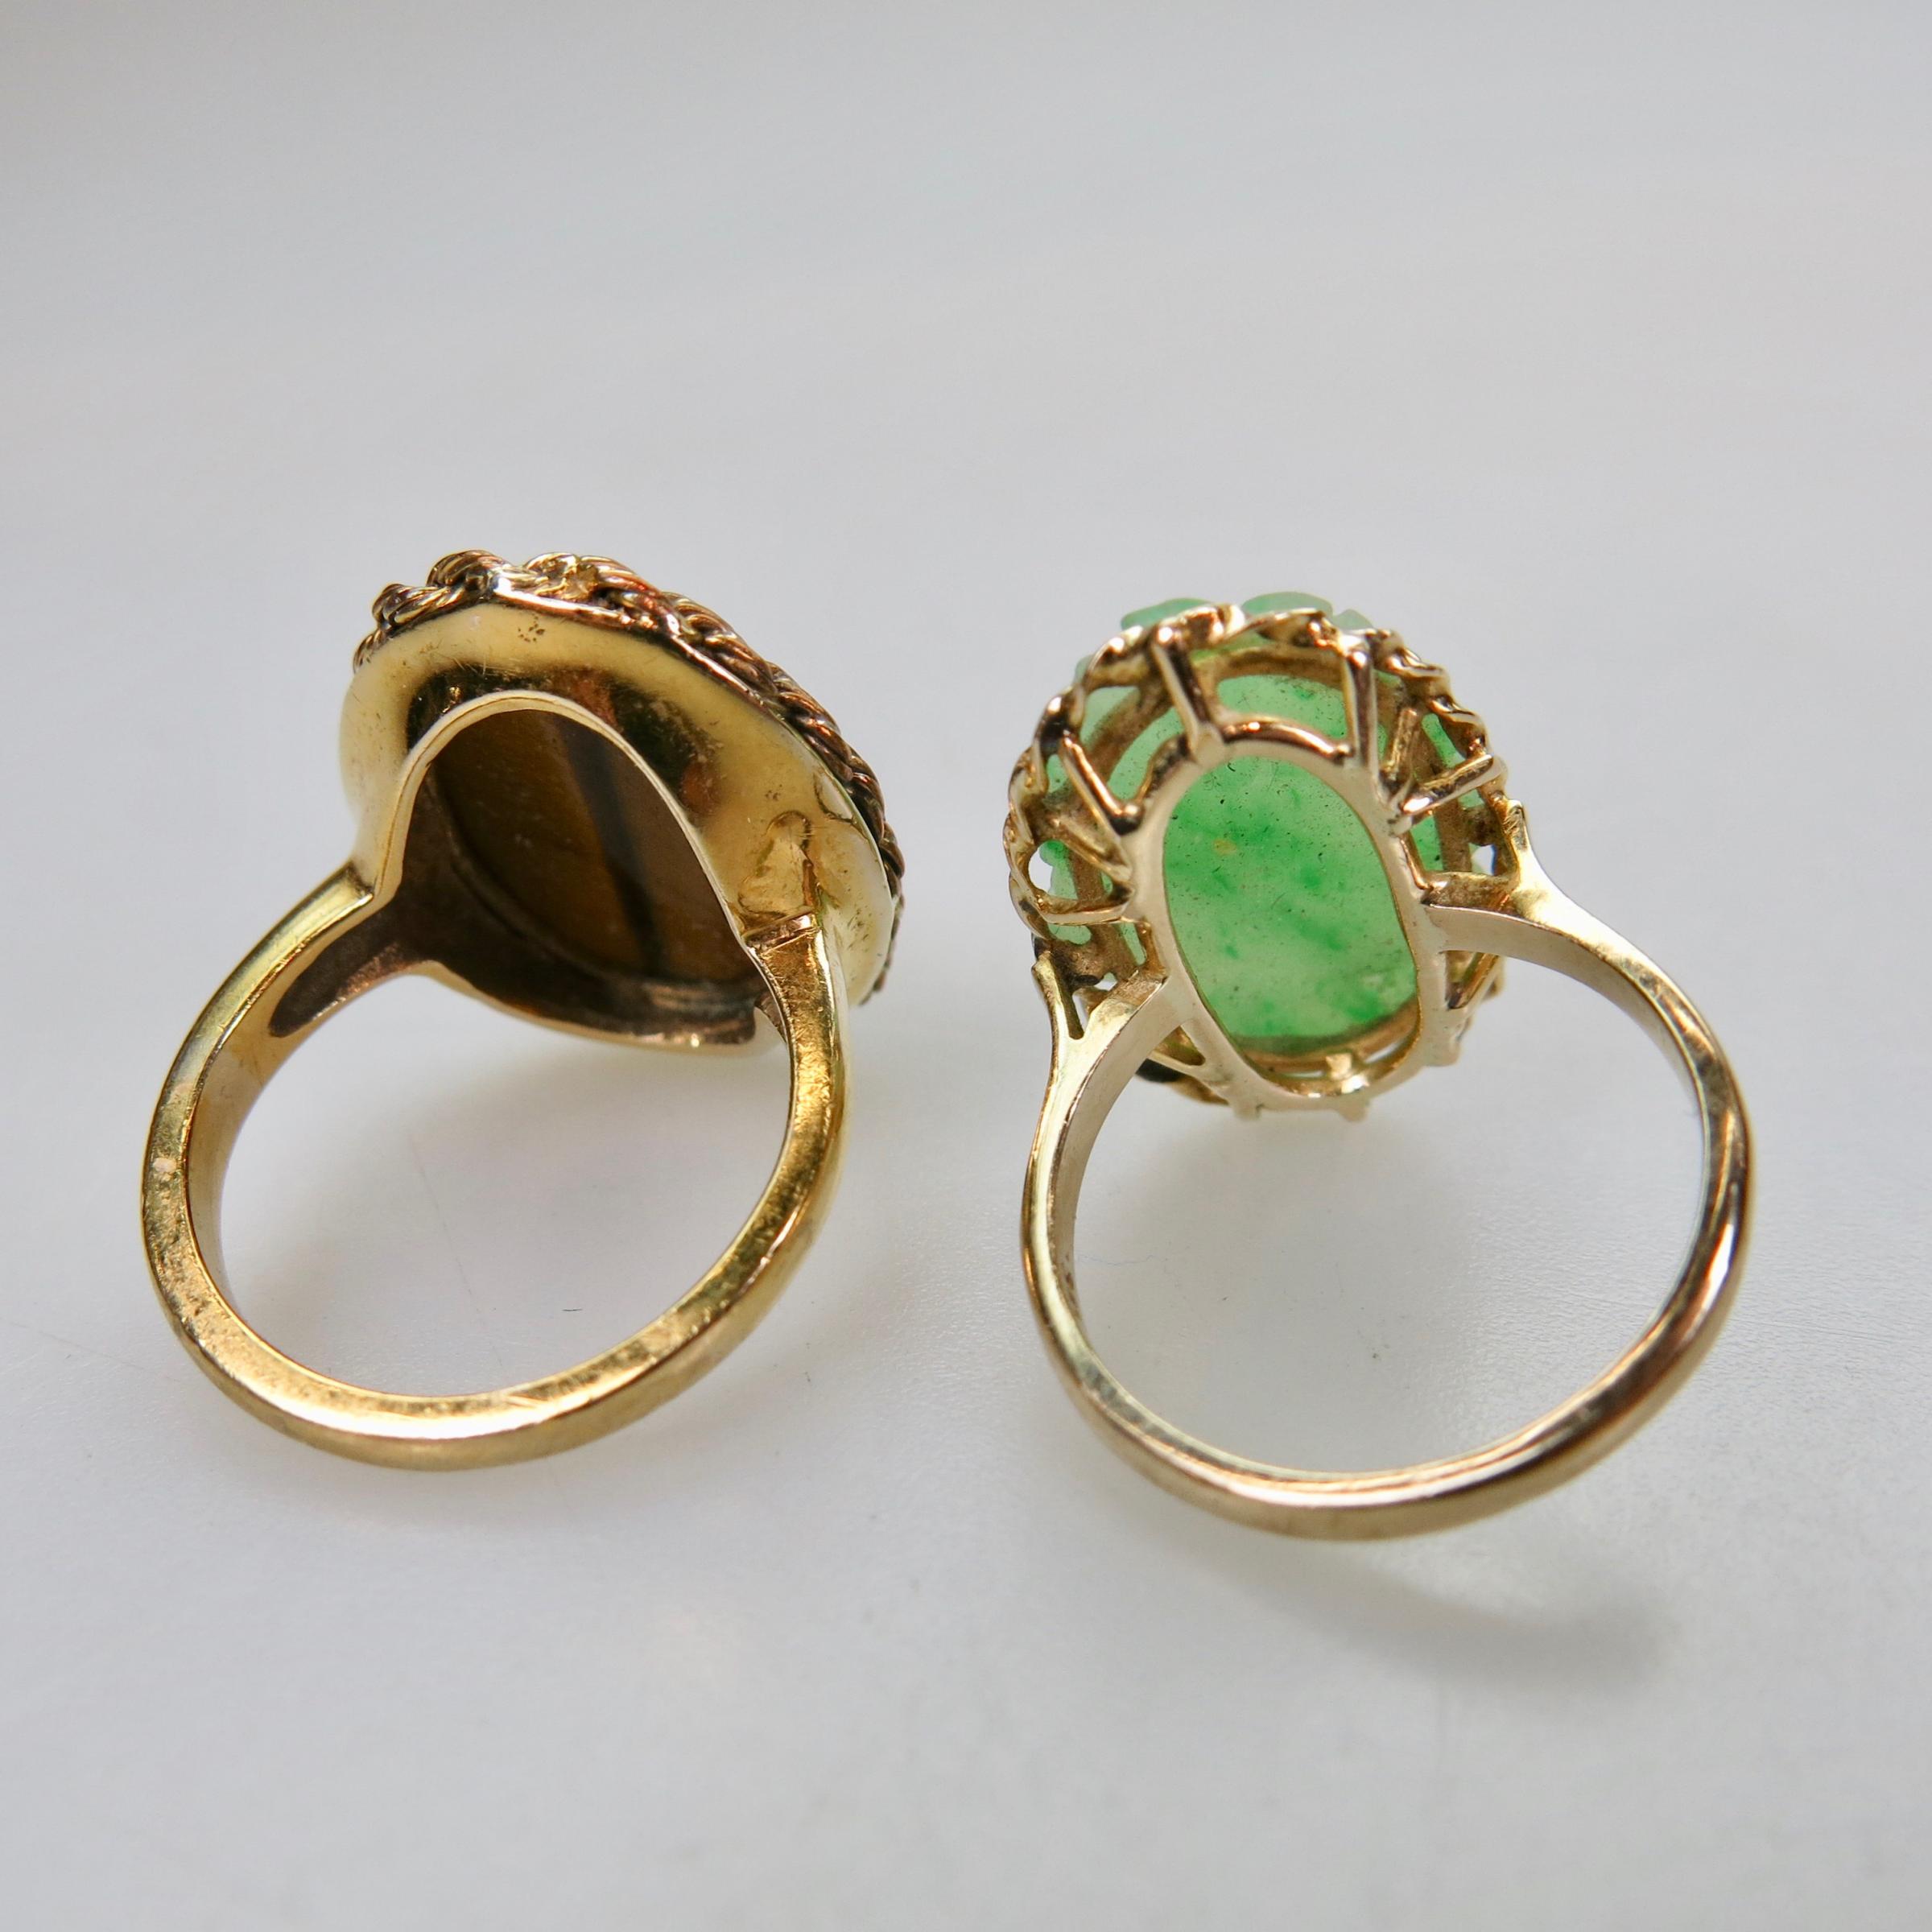 1 x 14k And 1 x 10k Yellow Gold Rings